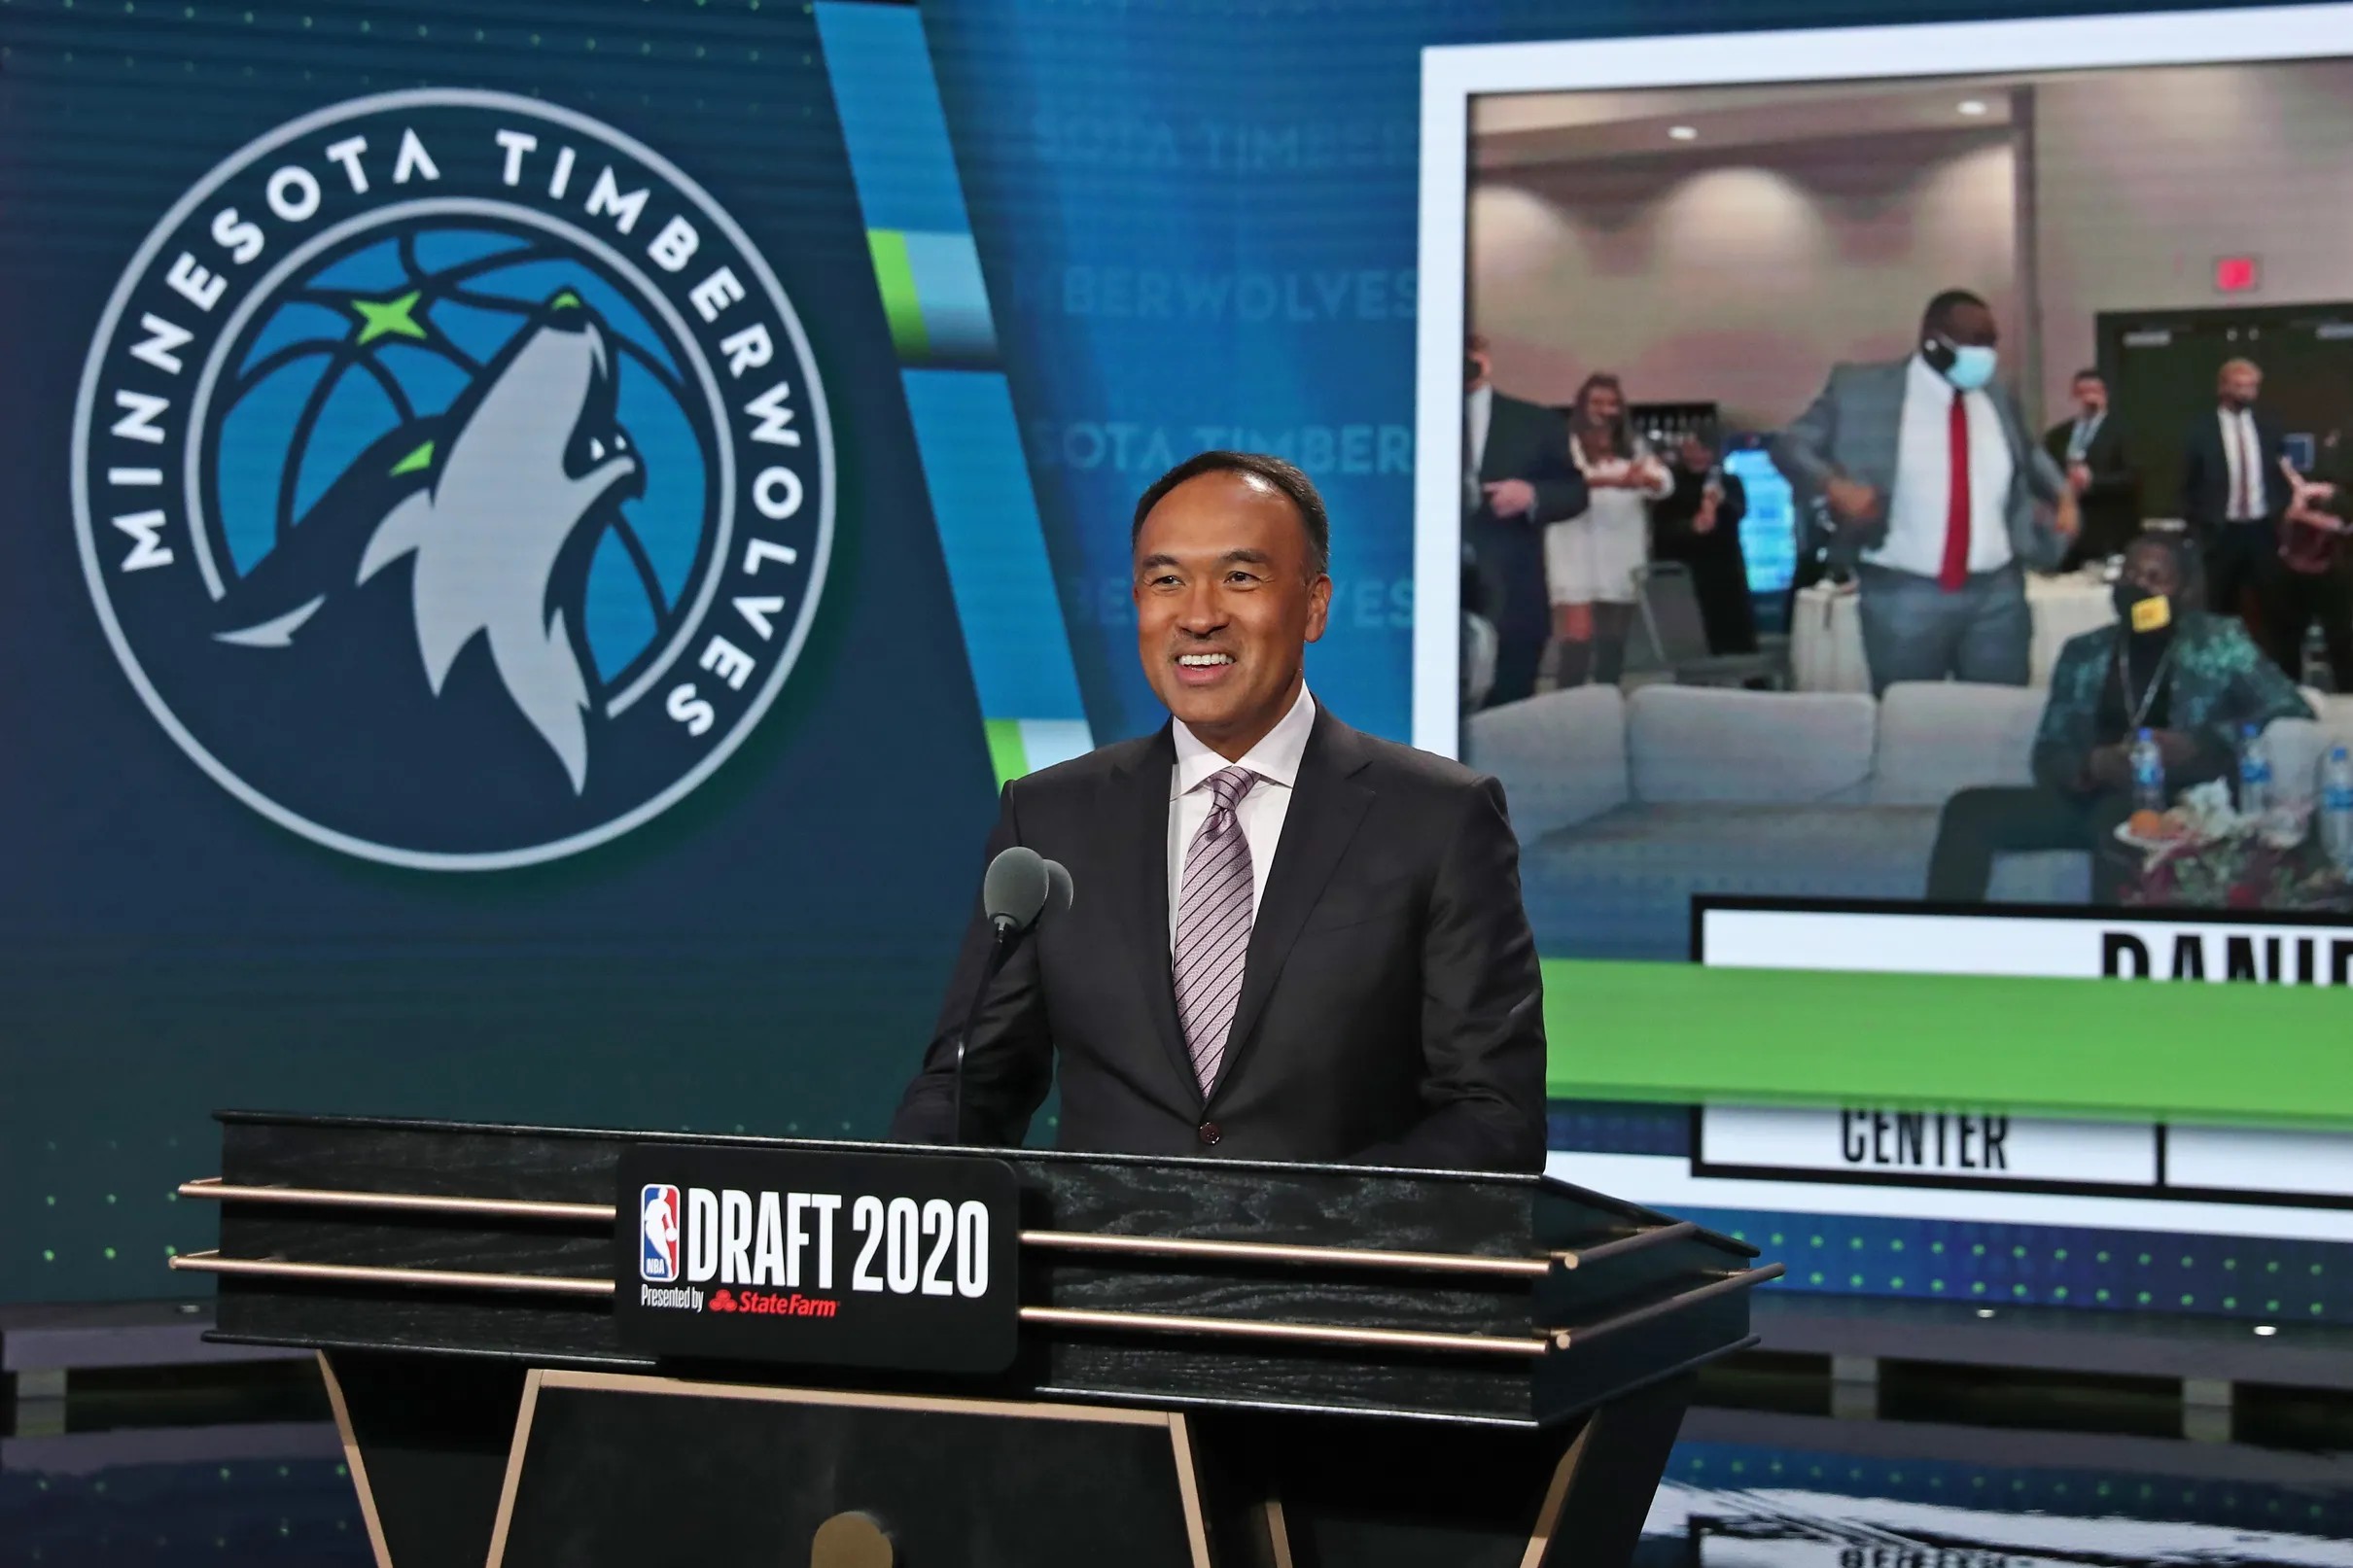 2022 NBA Draft Tiebreaker Results Timberwolves To Pick 19th Overall